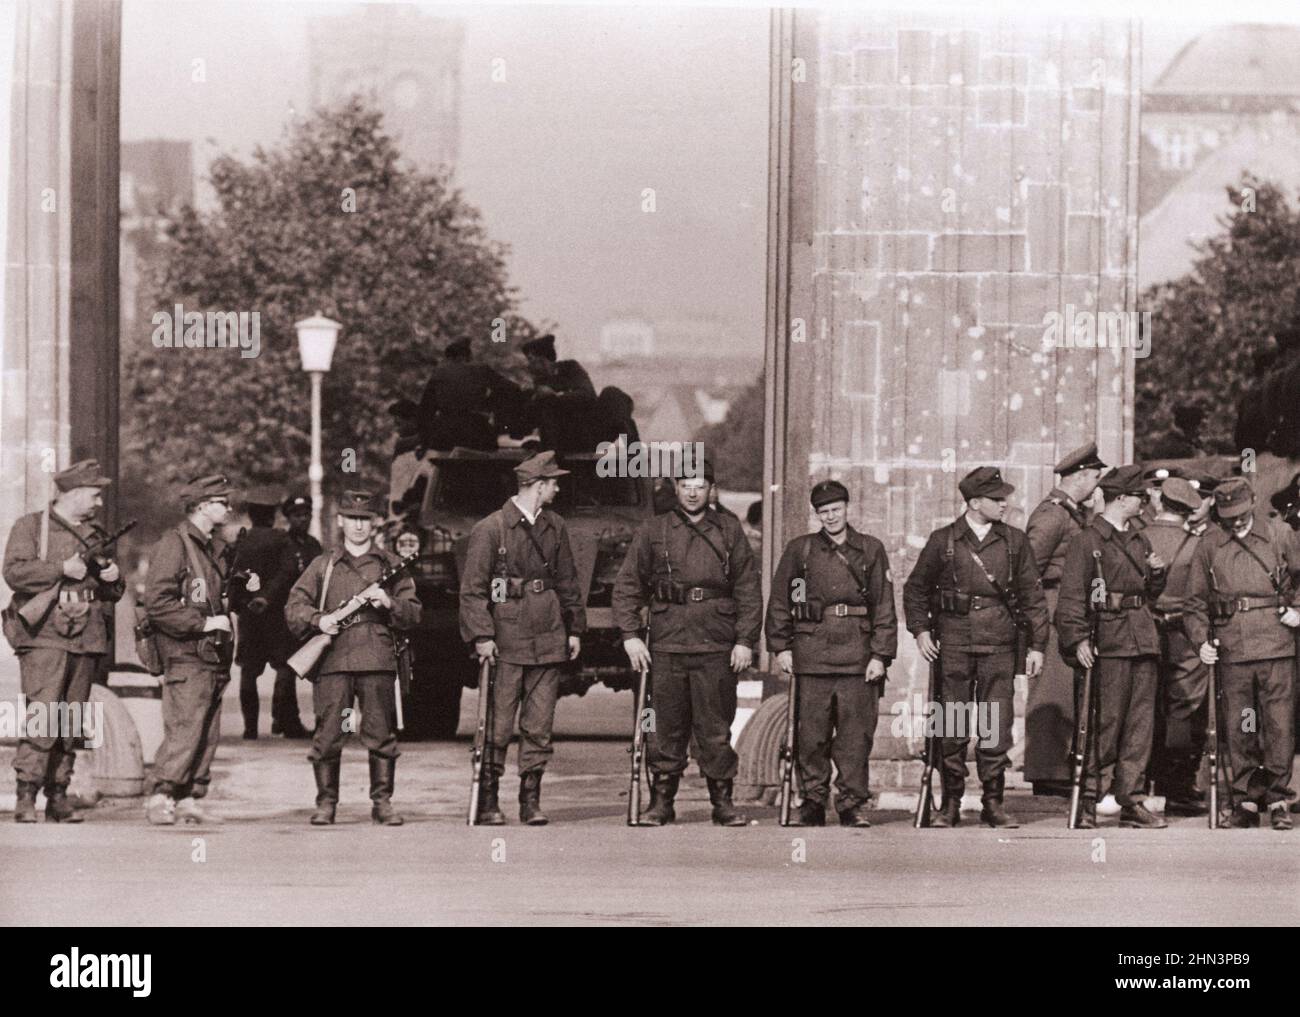 Vintage photo of Berlin Crisis of 1961: Building the Wall A Squad of East Berlin 'Workers' Militia' With Submachine Guns Stands Shoulder-To-Shoulder i Stock Photo